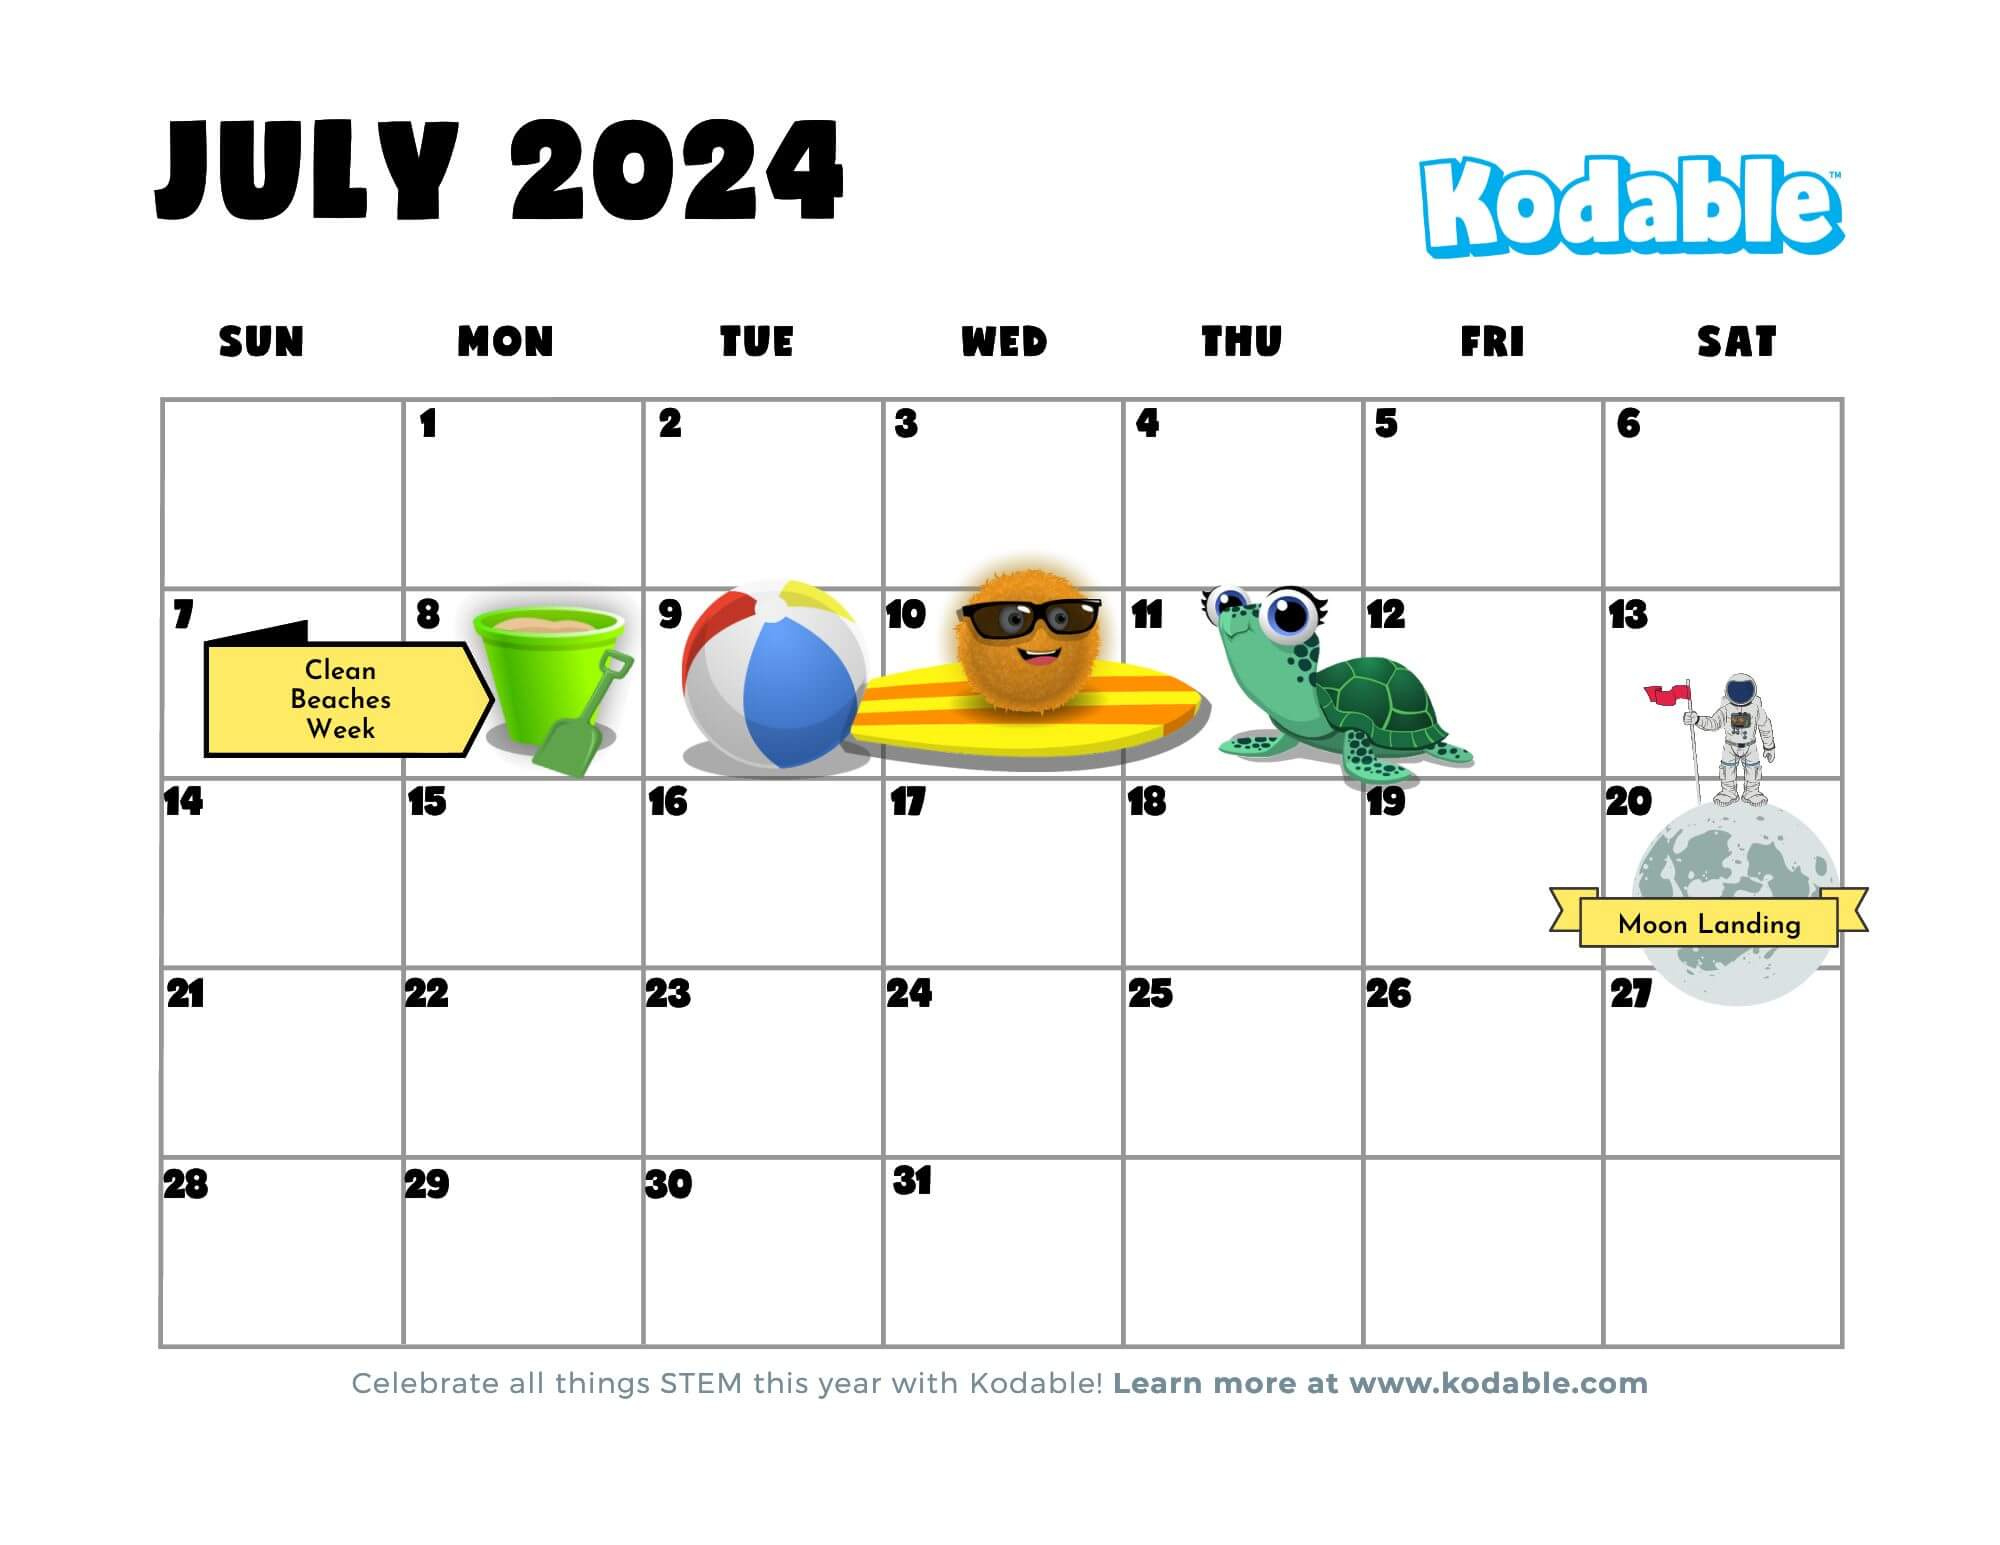 2023-2024 Stem Events Calendar And Holidays For Teachers | Kodable in Calendar Events July 2024